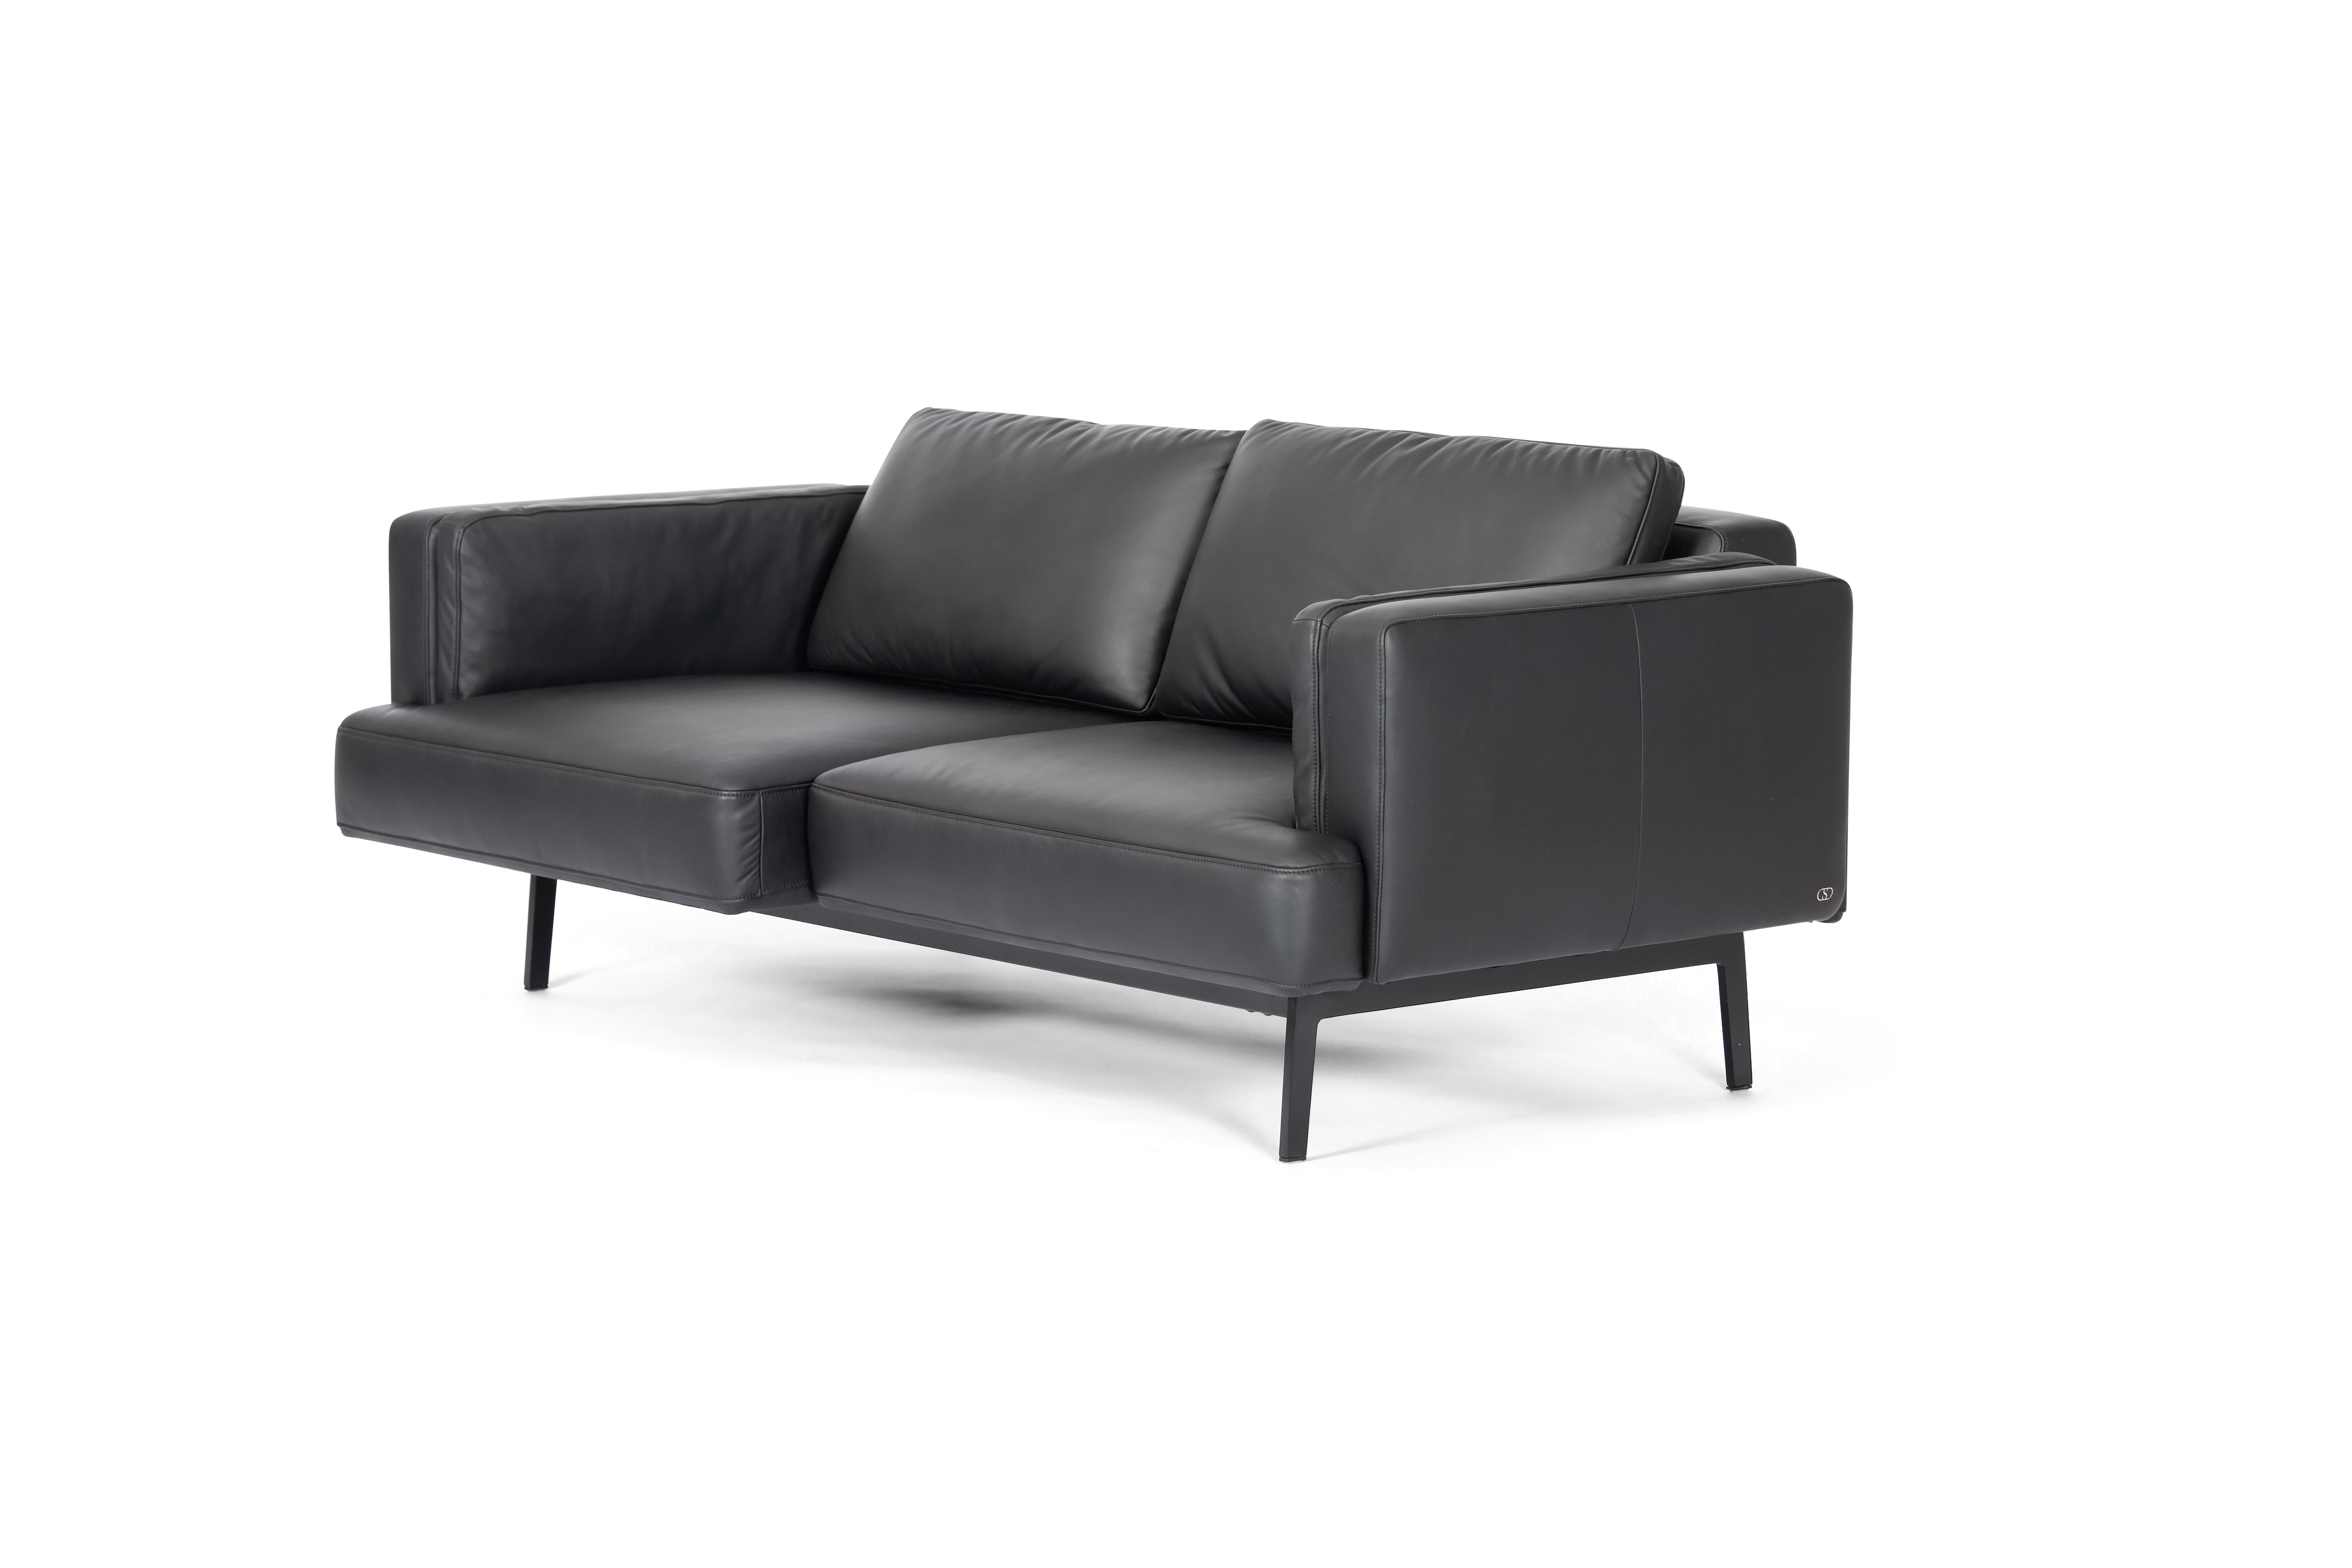 Swiss De Sede DS-747/03 Multifunctional Sofa in Black Leather Seat and Back Upholstery For Sale